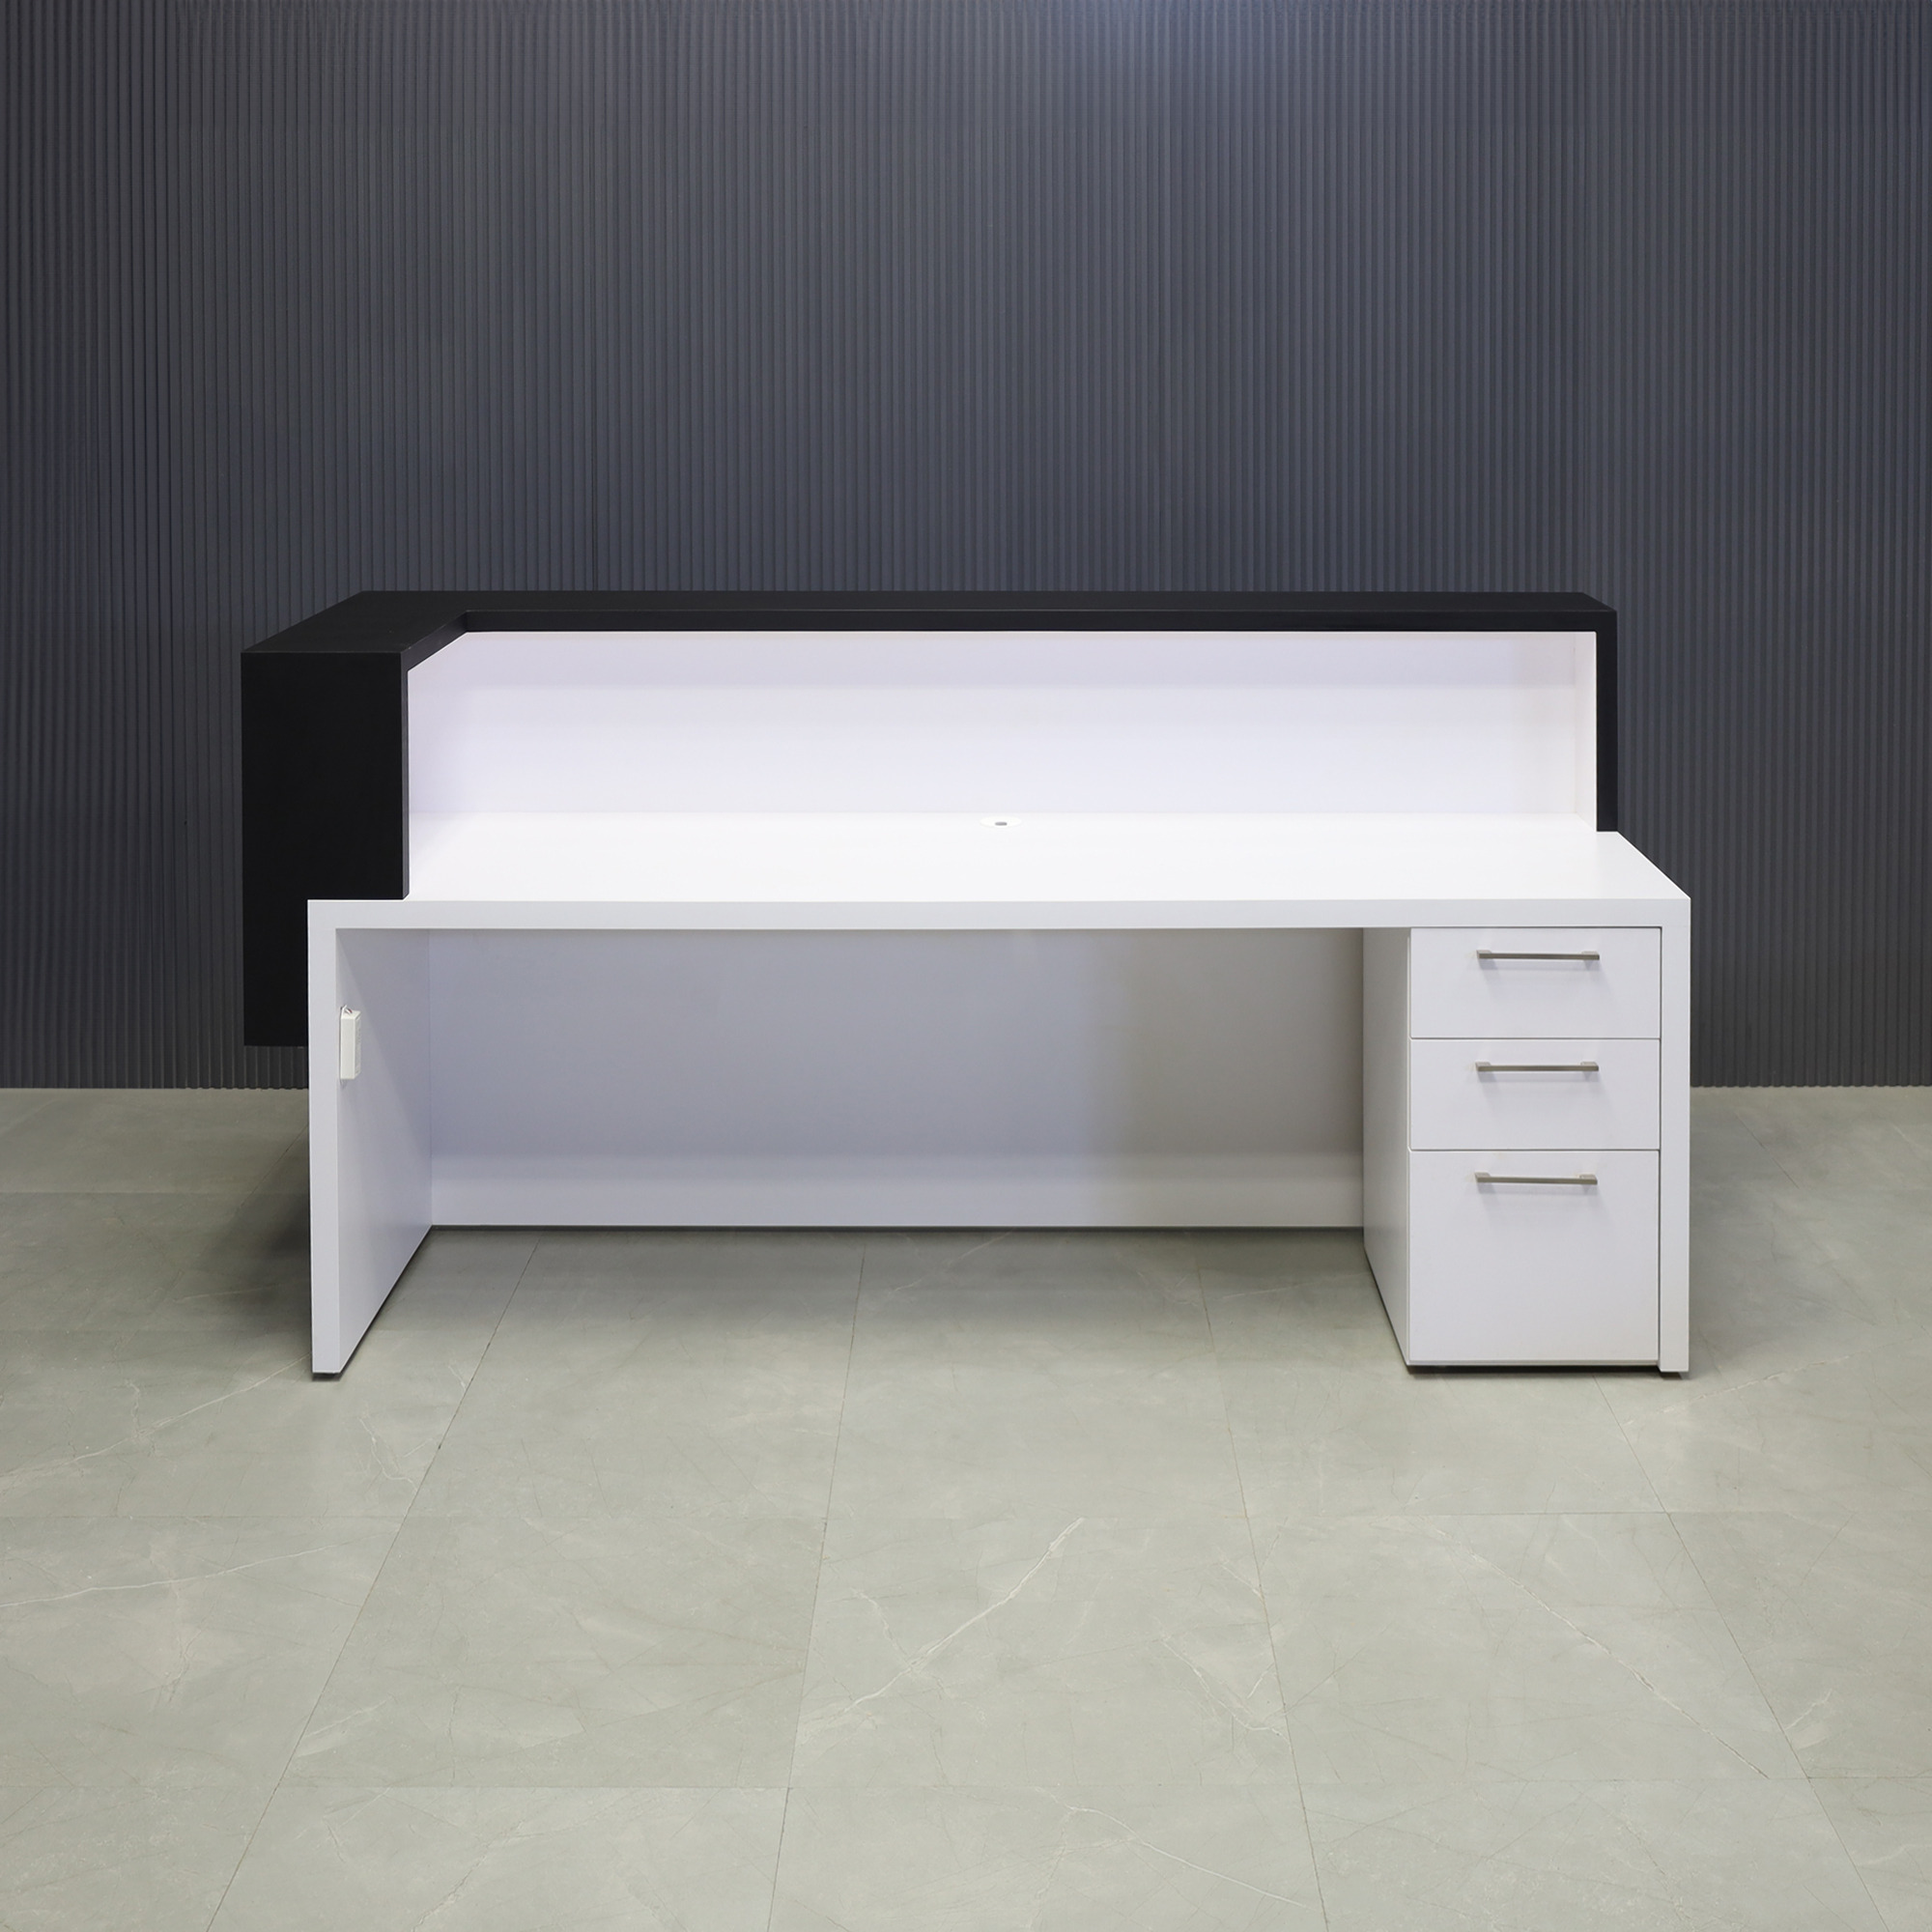 90-inch San Francisco L-Shape Reception Desk, right l-panel side when facing front in black matte laminate counter and white matte laminate desk, with white LED, and buil-in storage on right side when sitting, shown here.